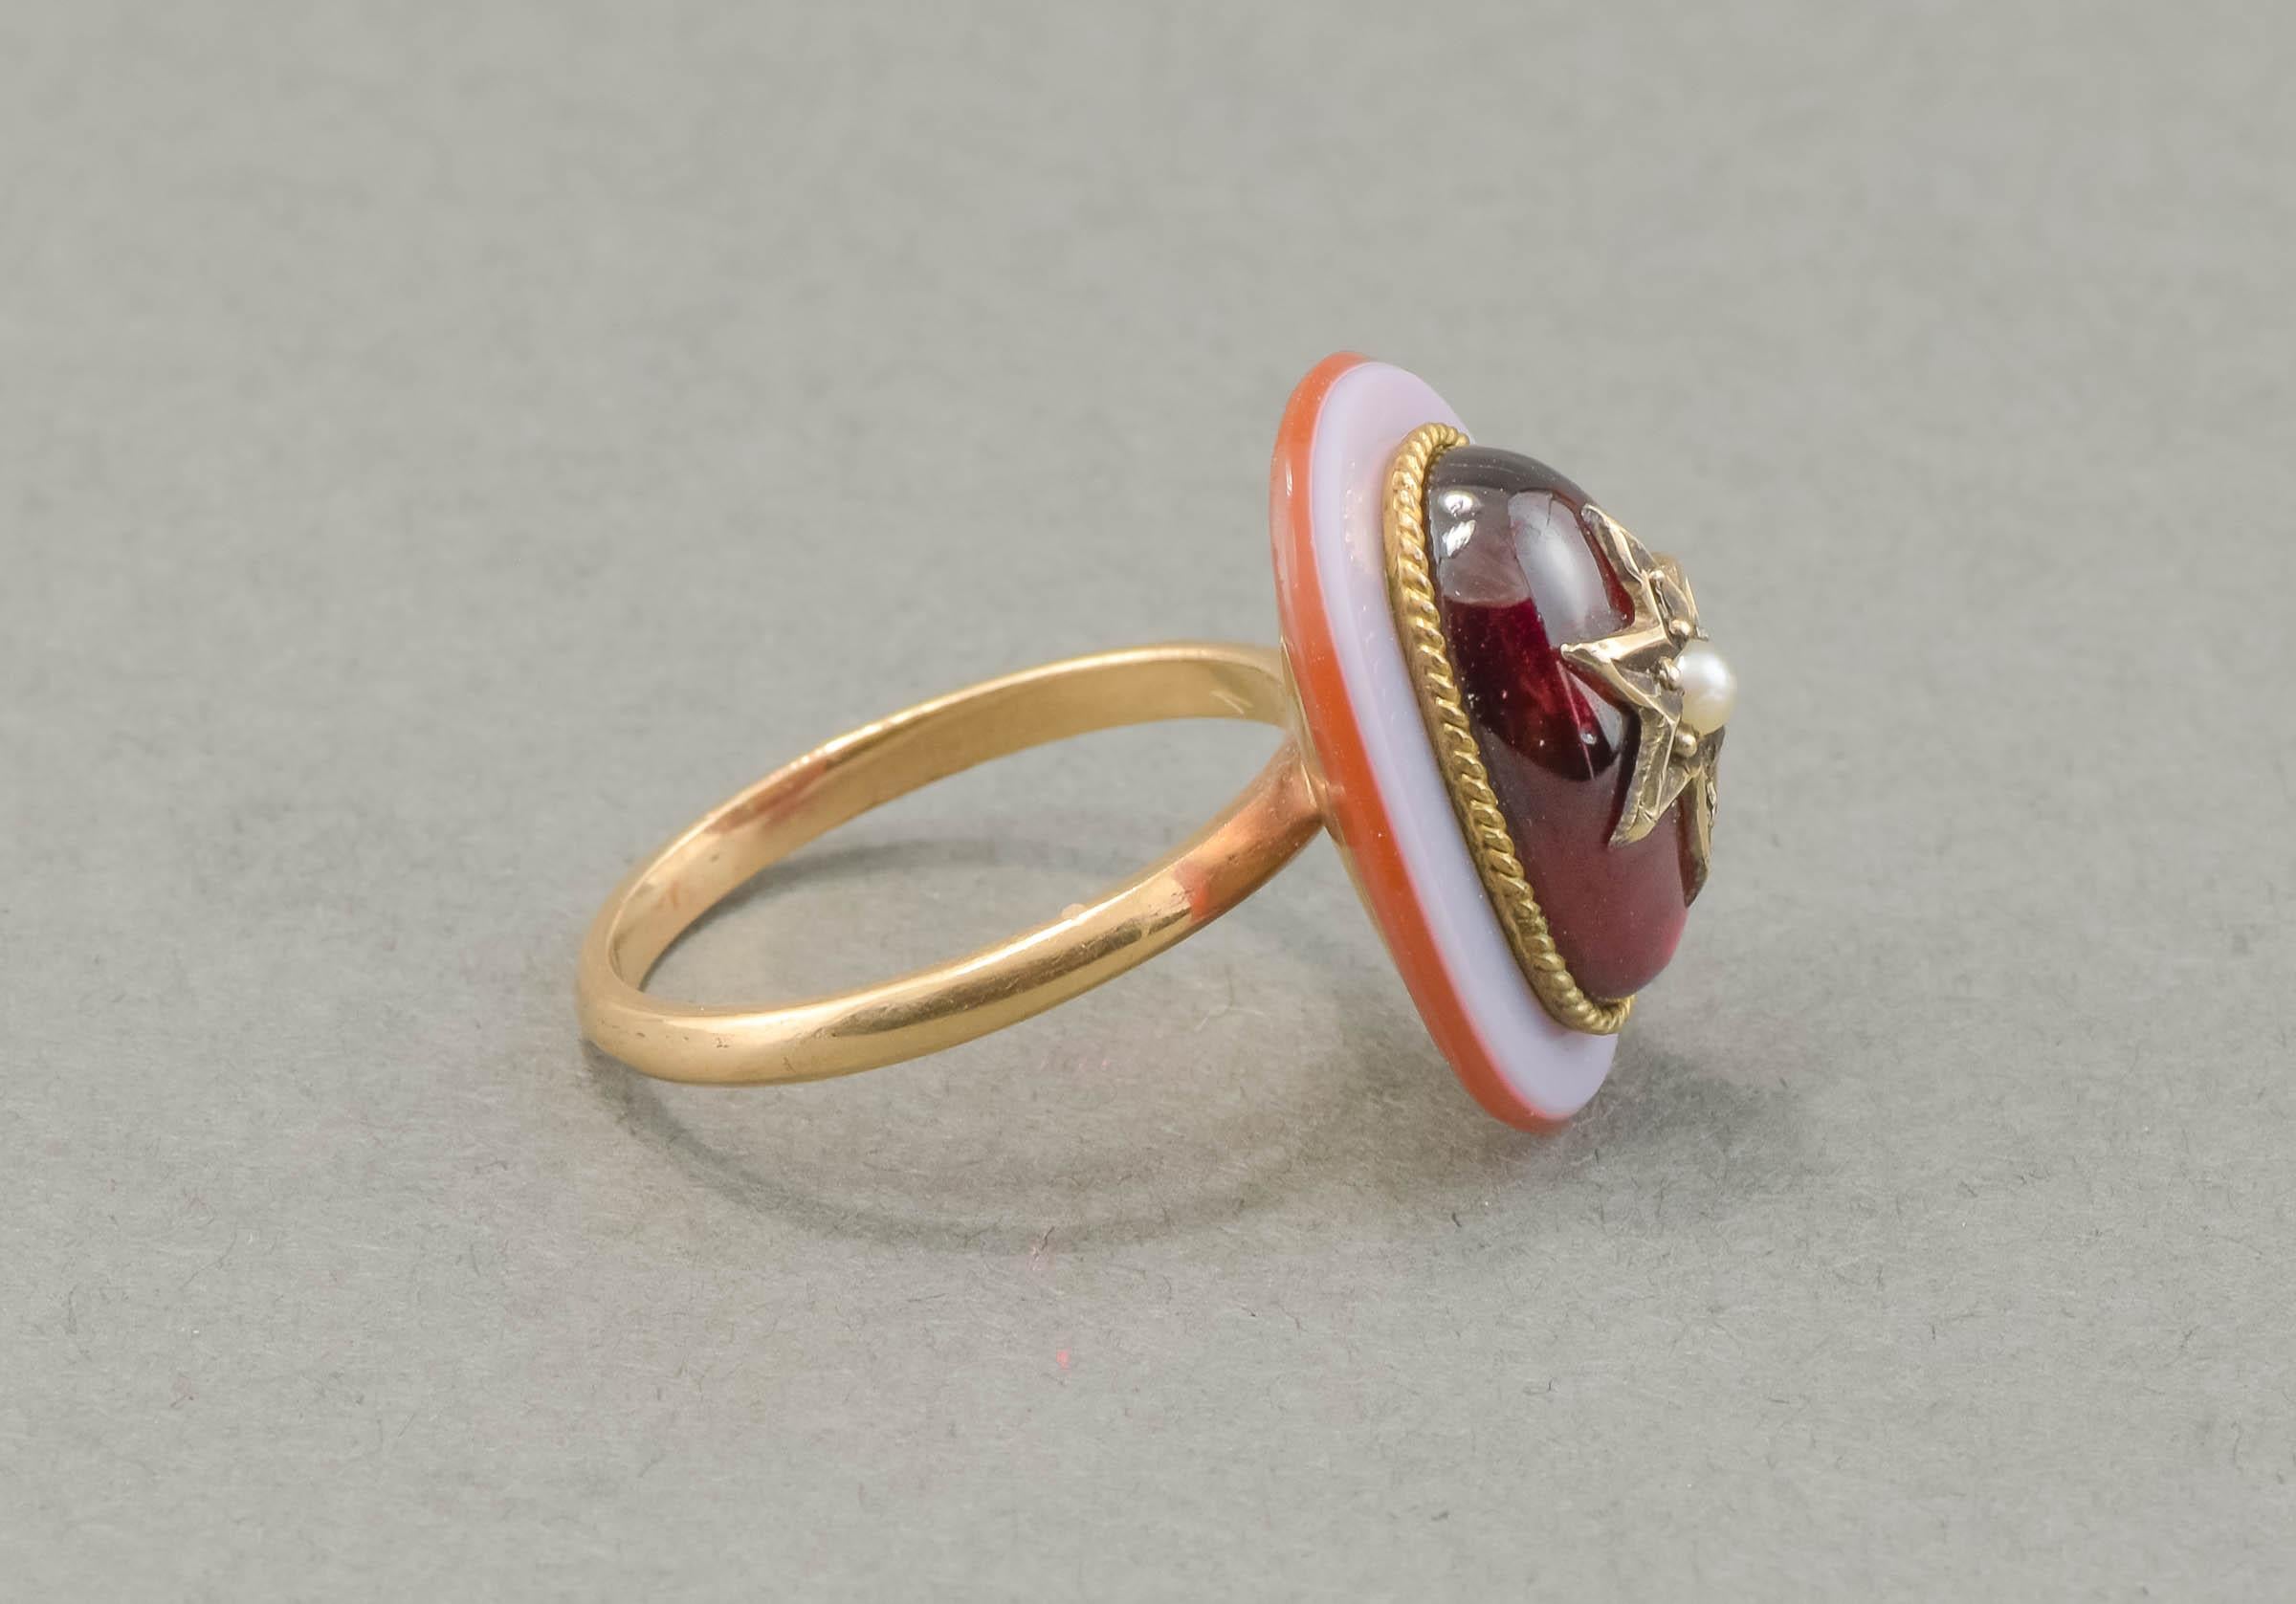 Cabochon Antique Star Ring with Garnet, Agate & Pearl - Striking Conversion Ring For Sale